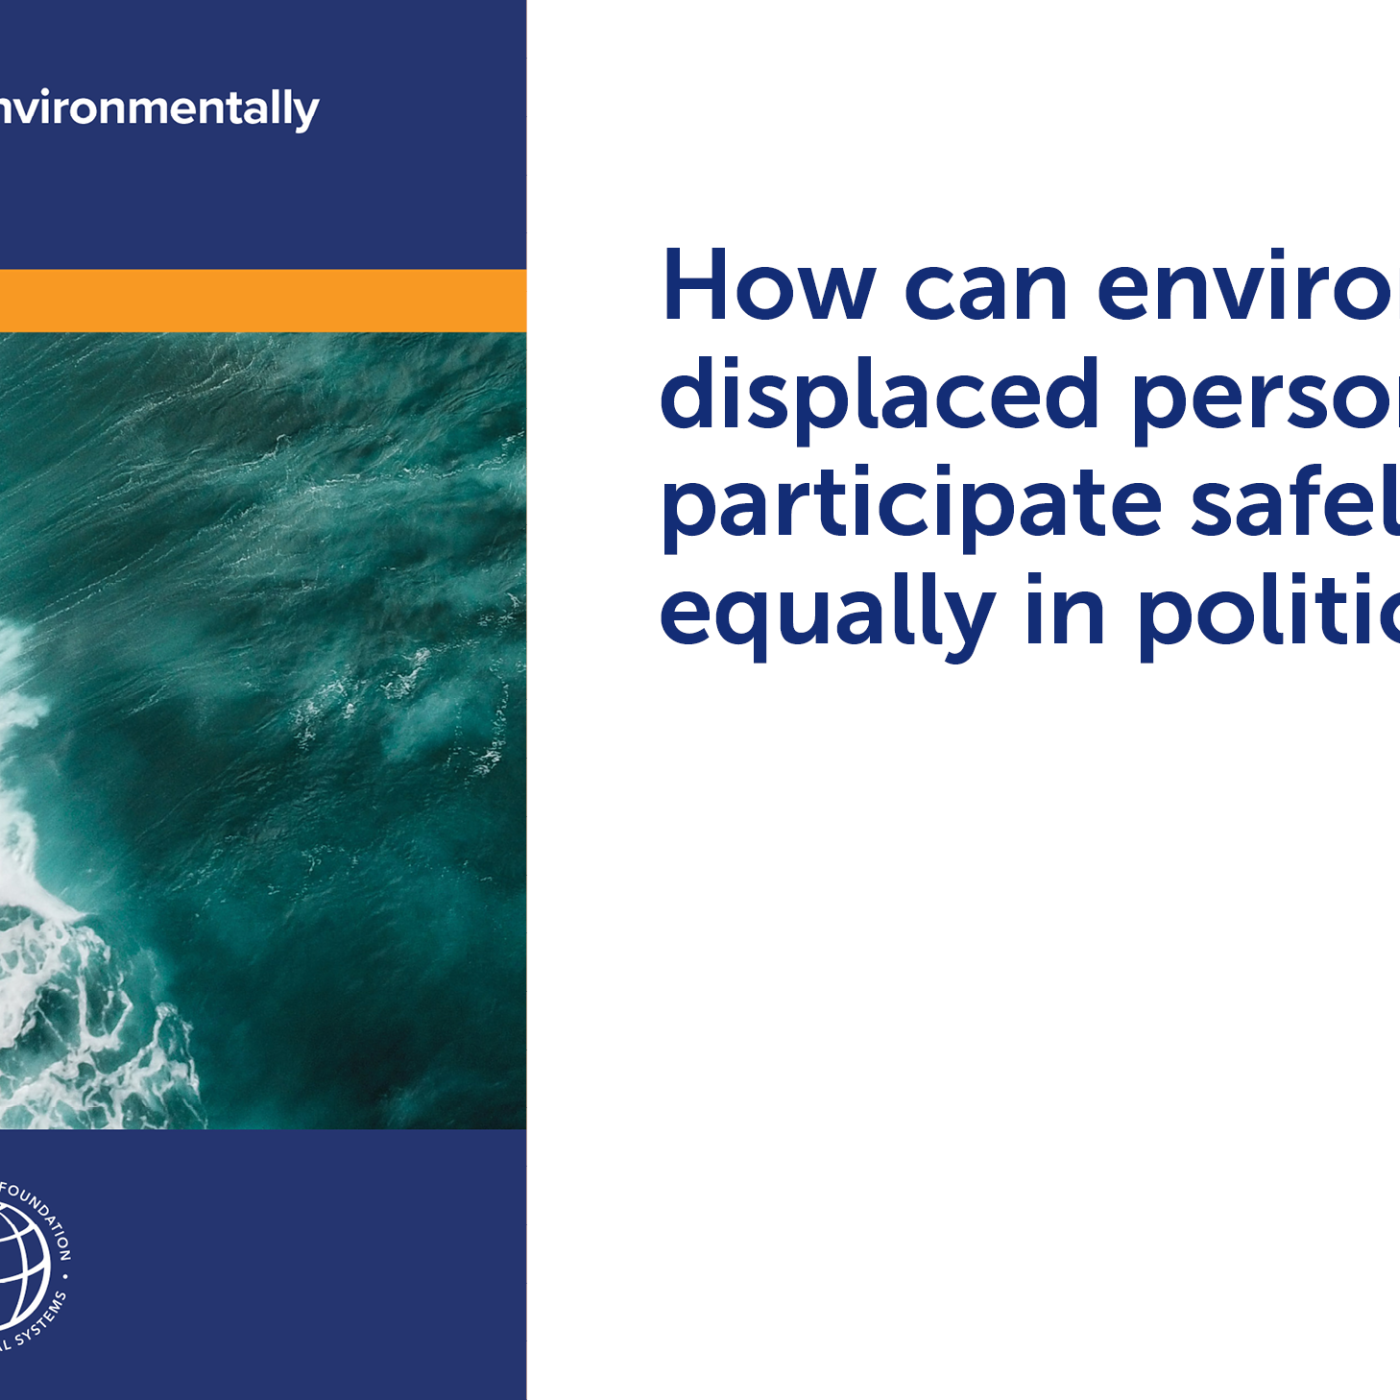 Electoral Rights of Environmentally  Displaced Persons cover + "How can environmentally displaced persons participate safely and equally in political life?"